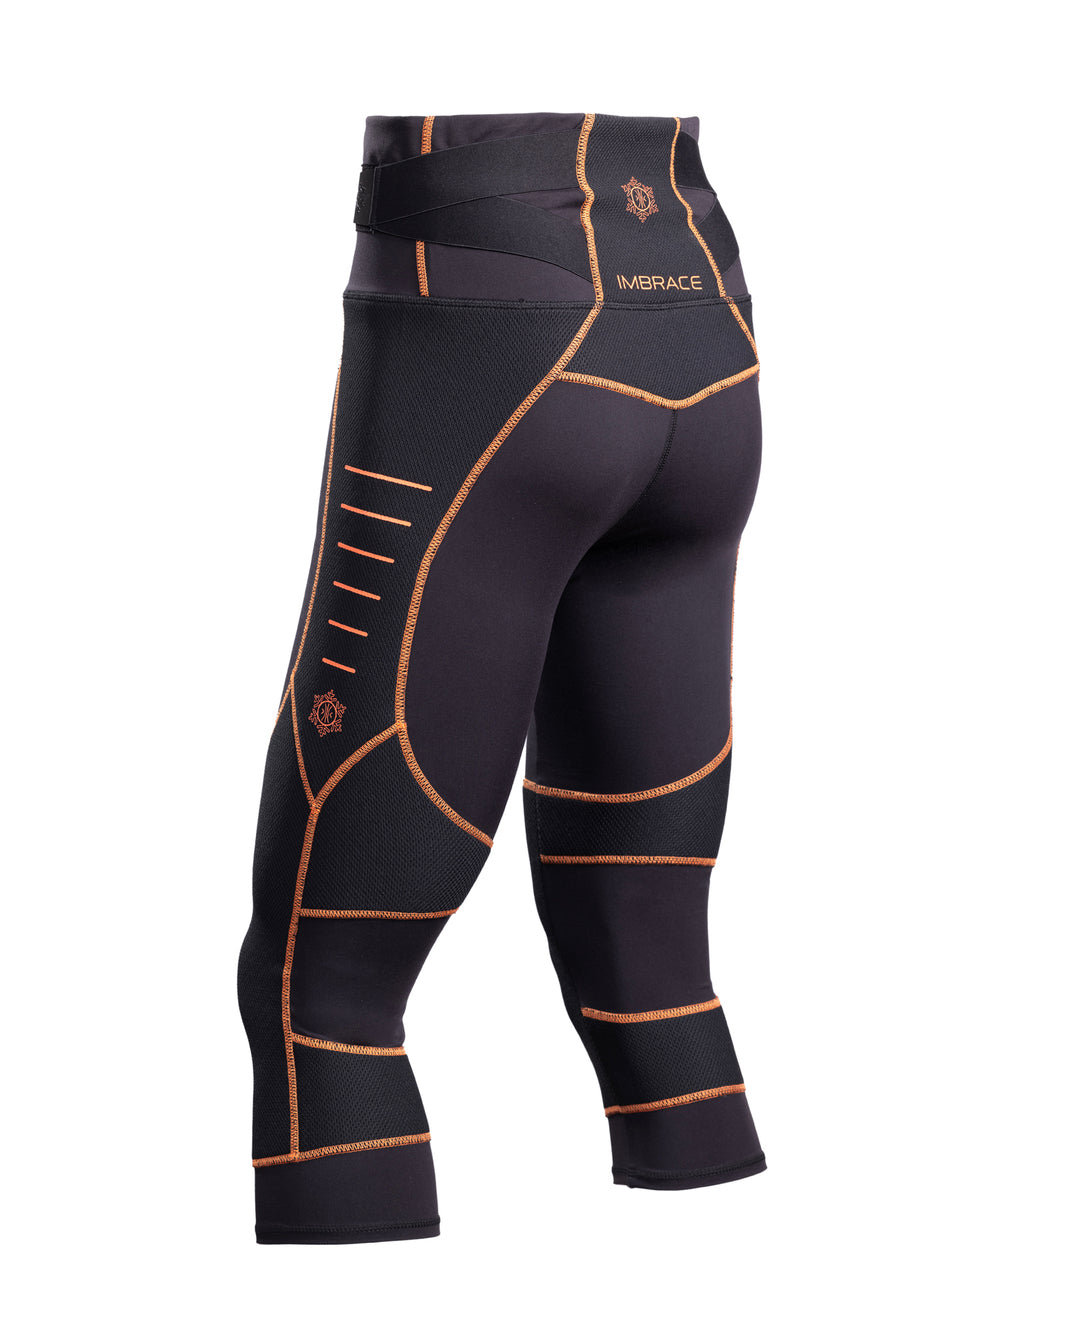 Imbrace Knee Support Compression Leggings